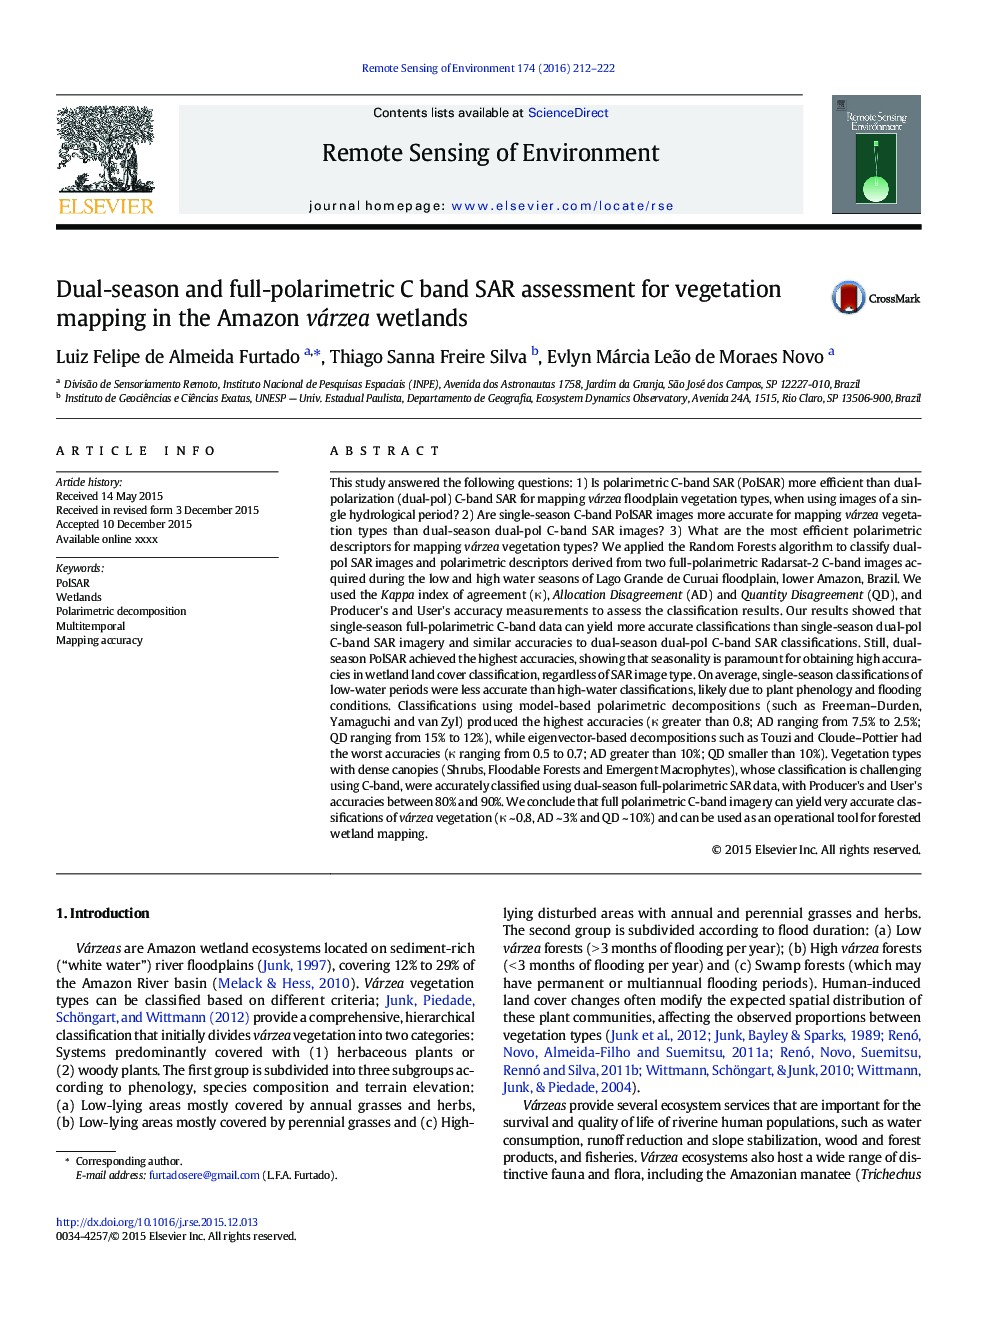 Dual-season and full-polarimetric C band SAR assessment for vegetation mapping in the Amazon várzea wetlands